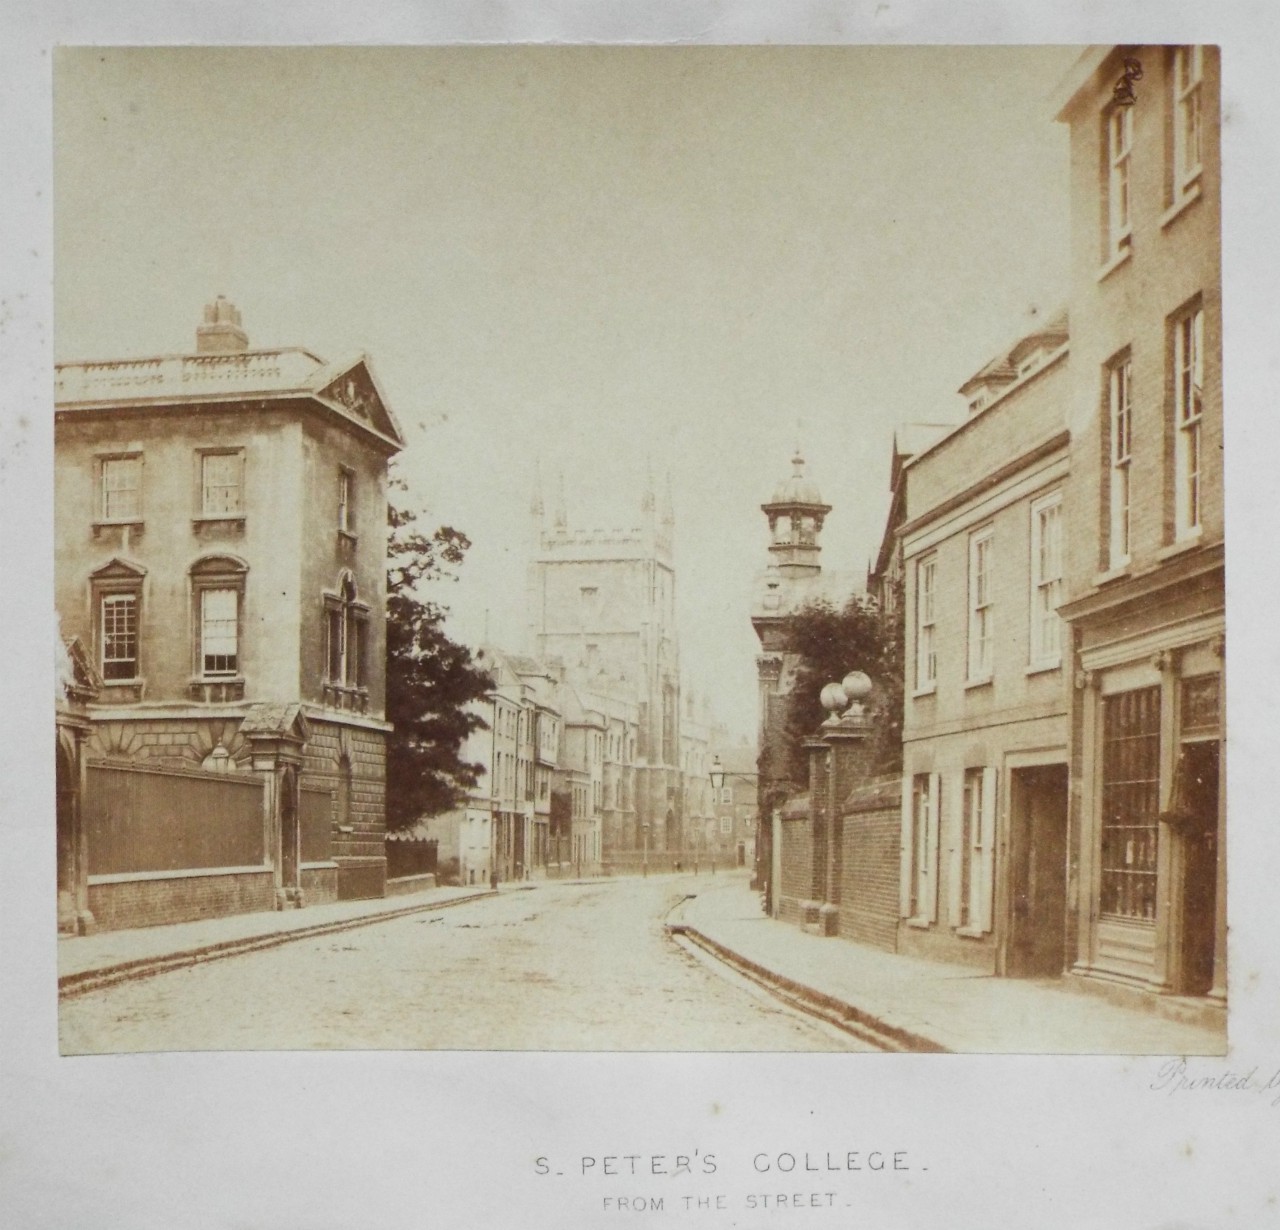 Photograph - St. Peter's College - from the Street.